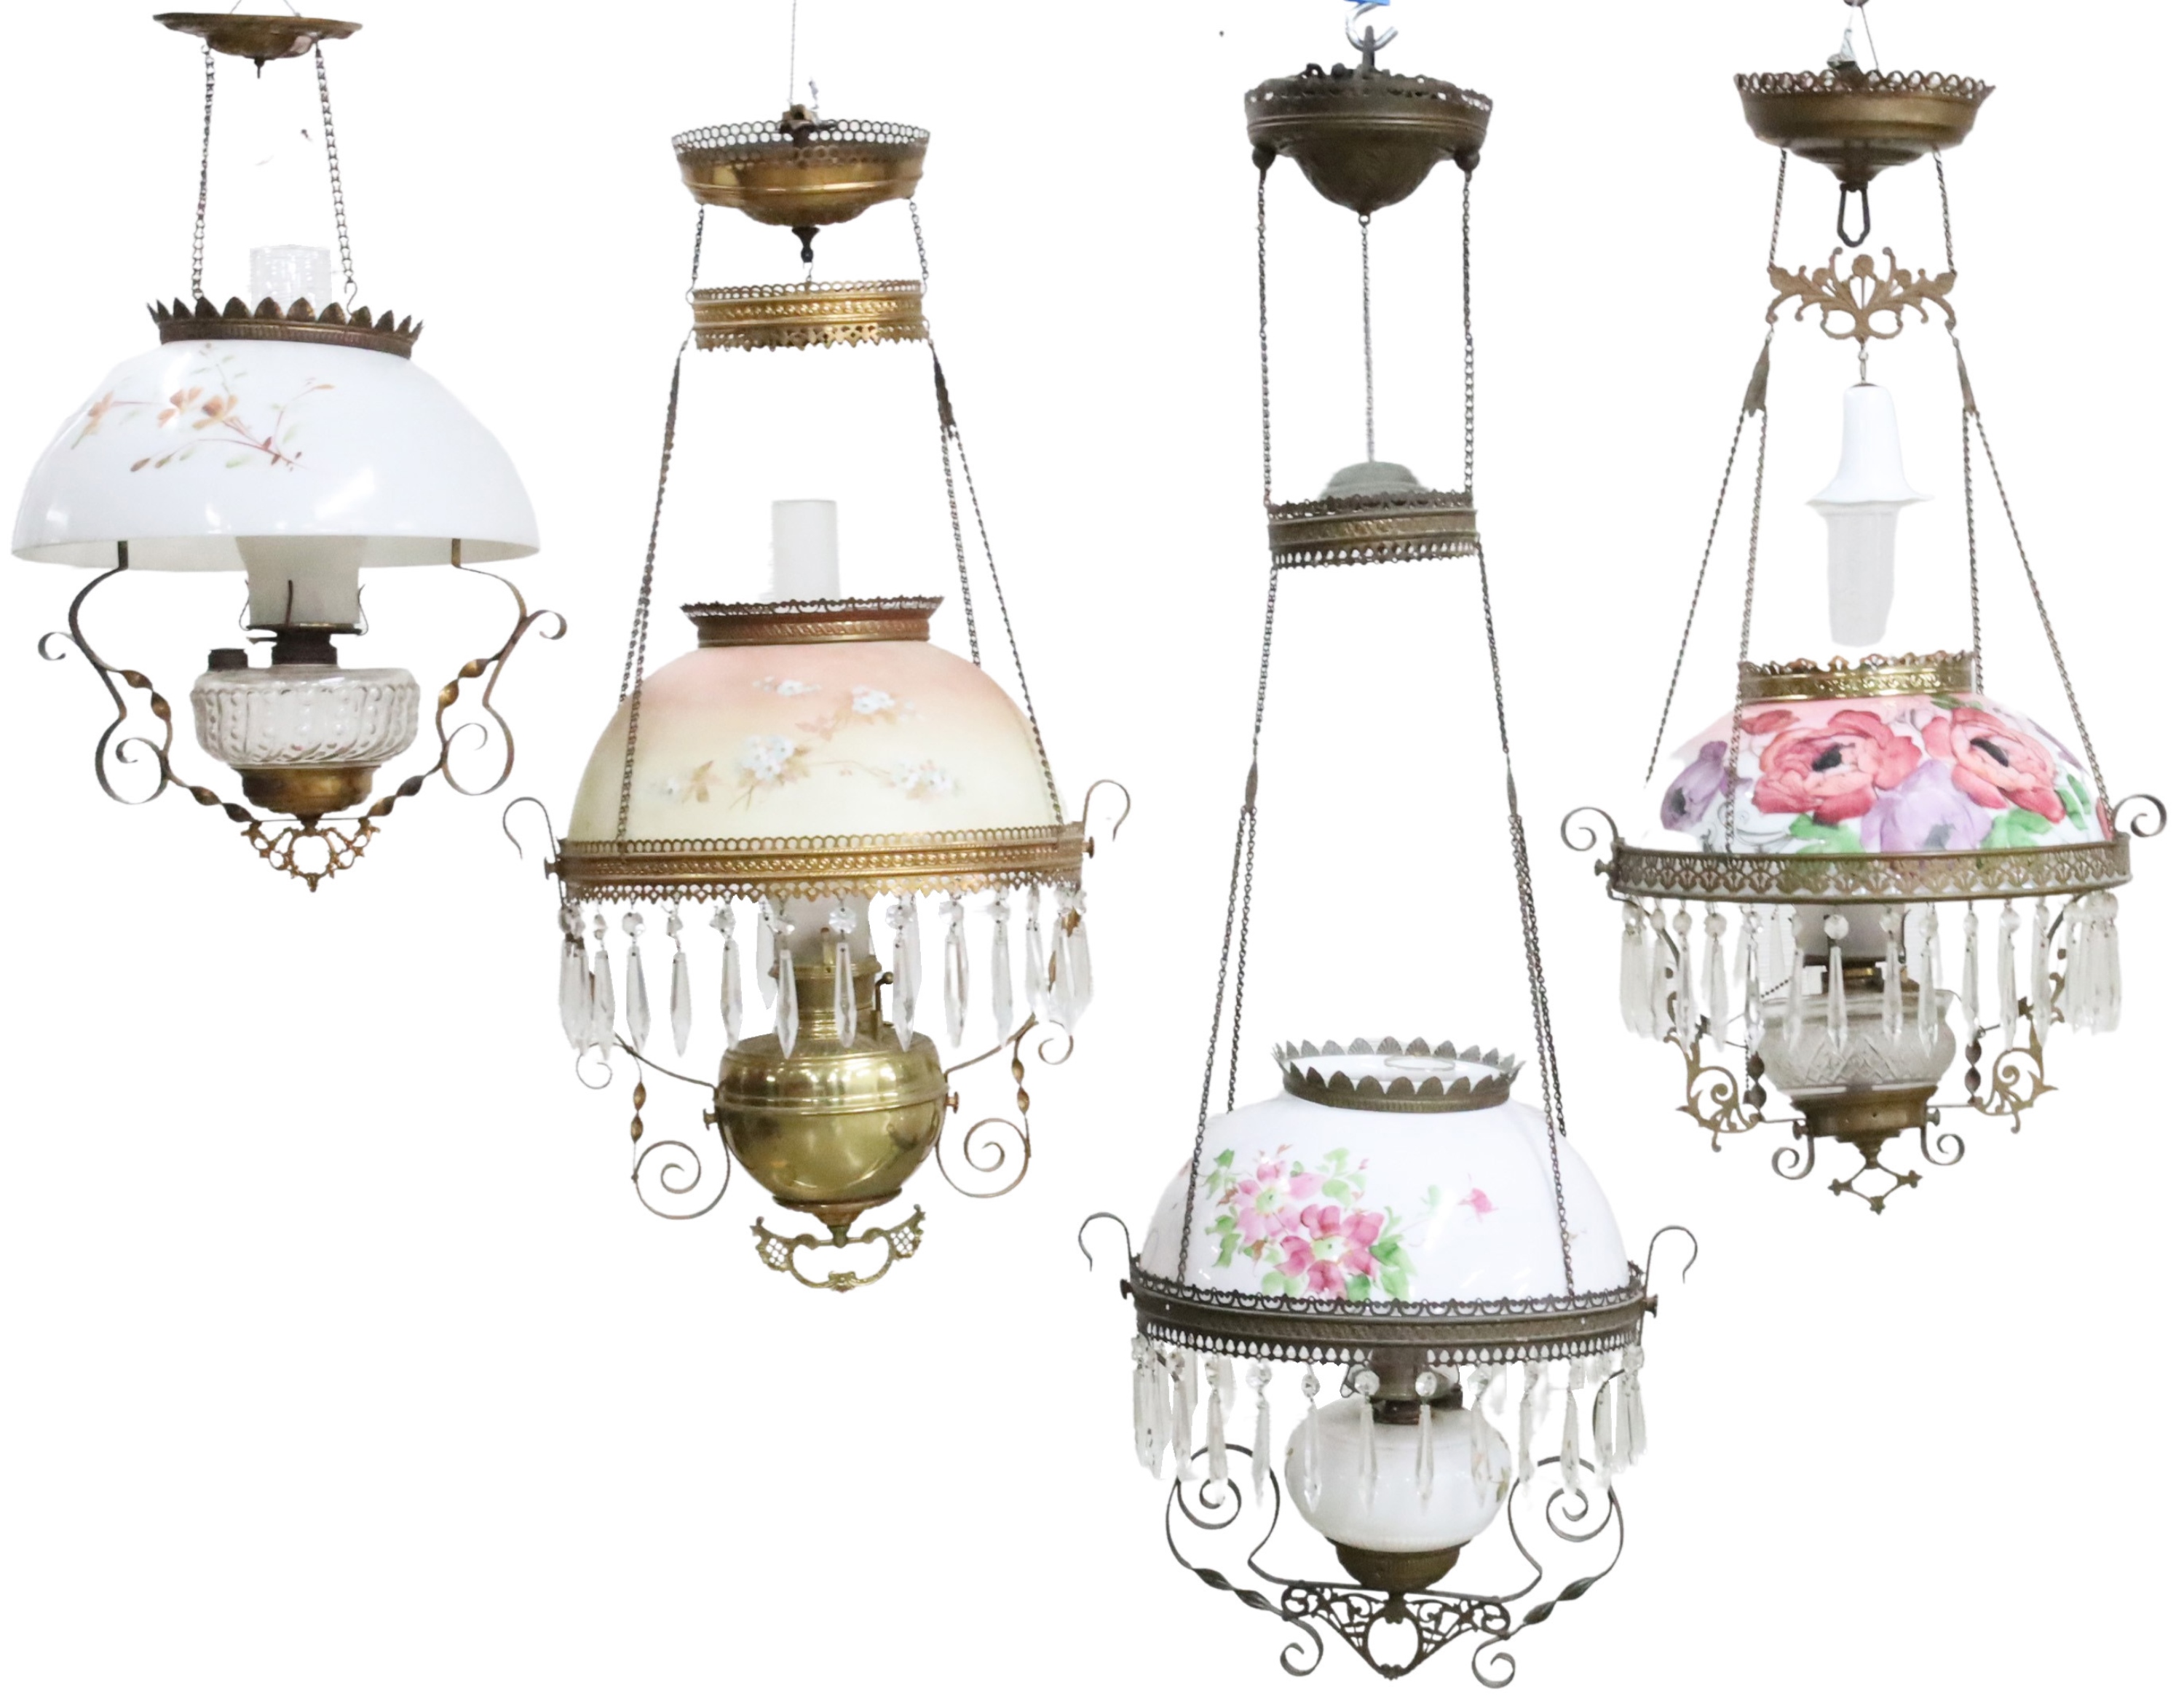 GROUP OF 4 HANGING OIL LAMPS Group